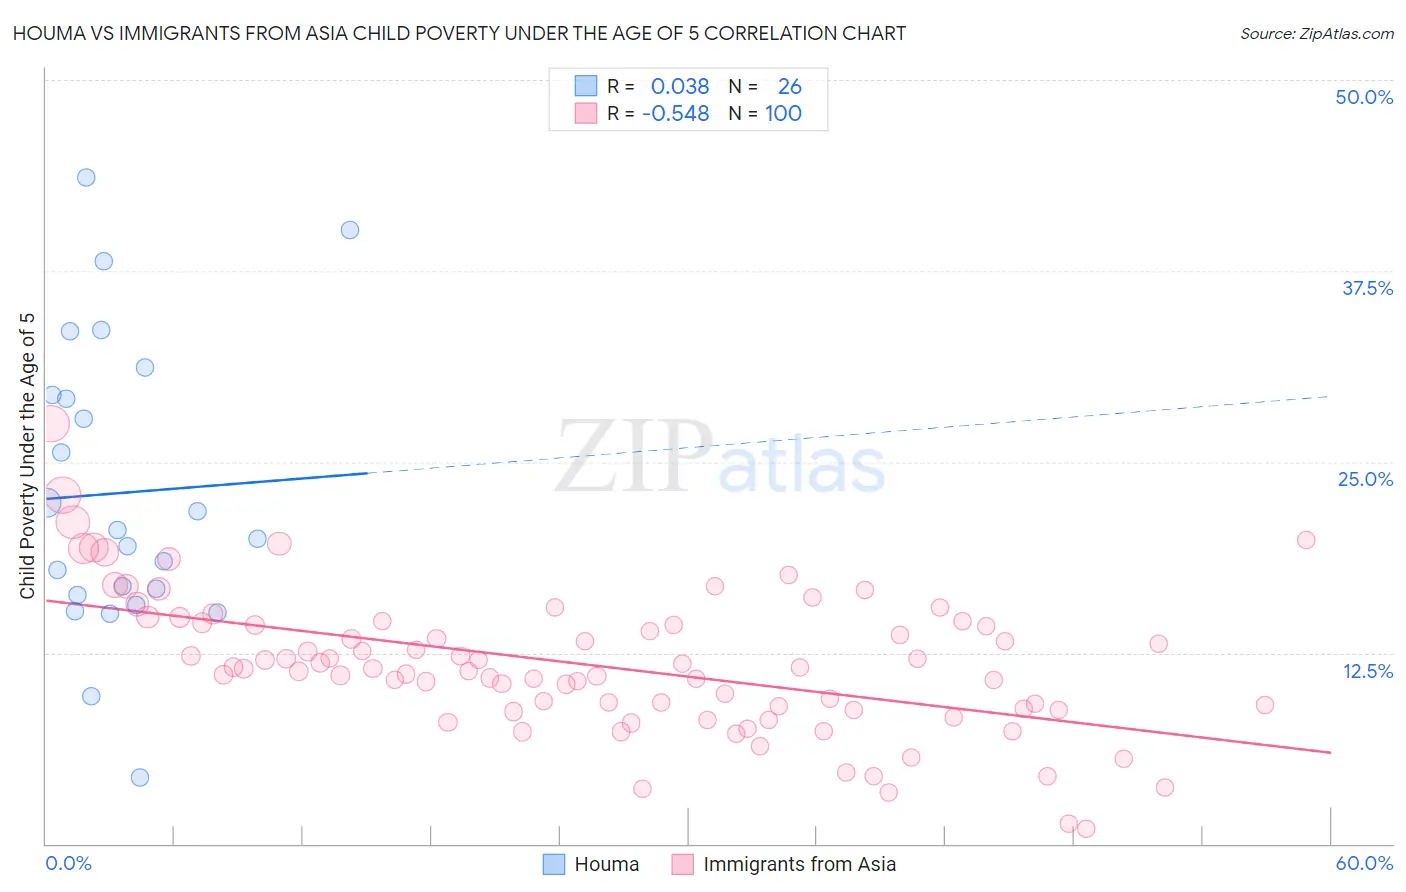 Houma vs Immigrants from Asia Child Poverty Under the Age of 5